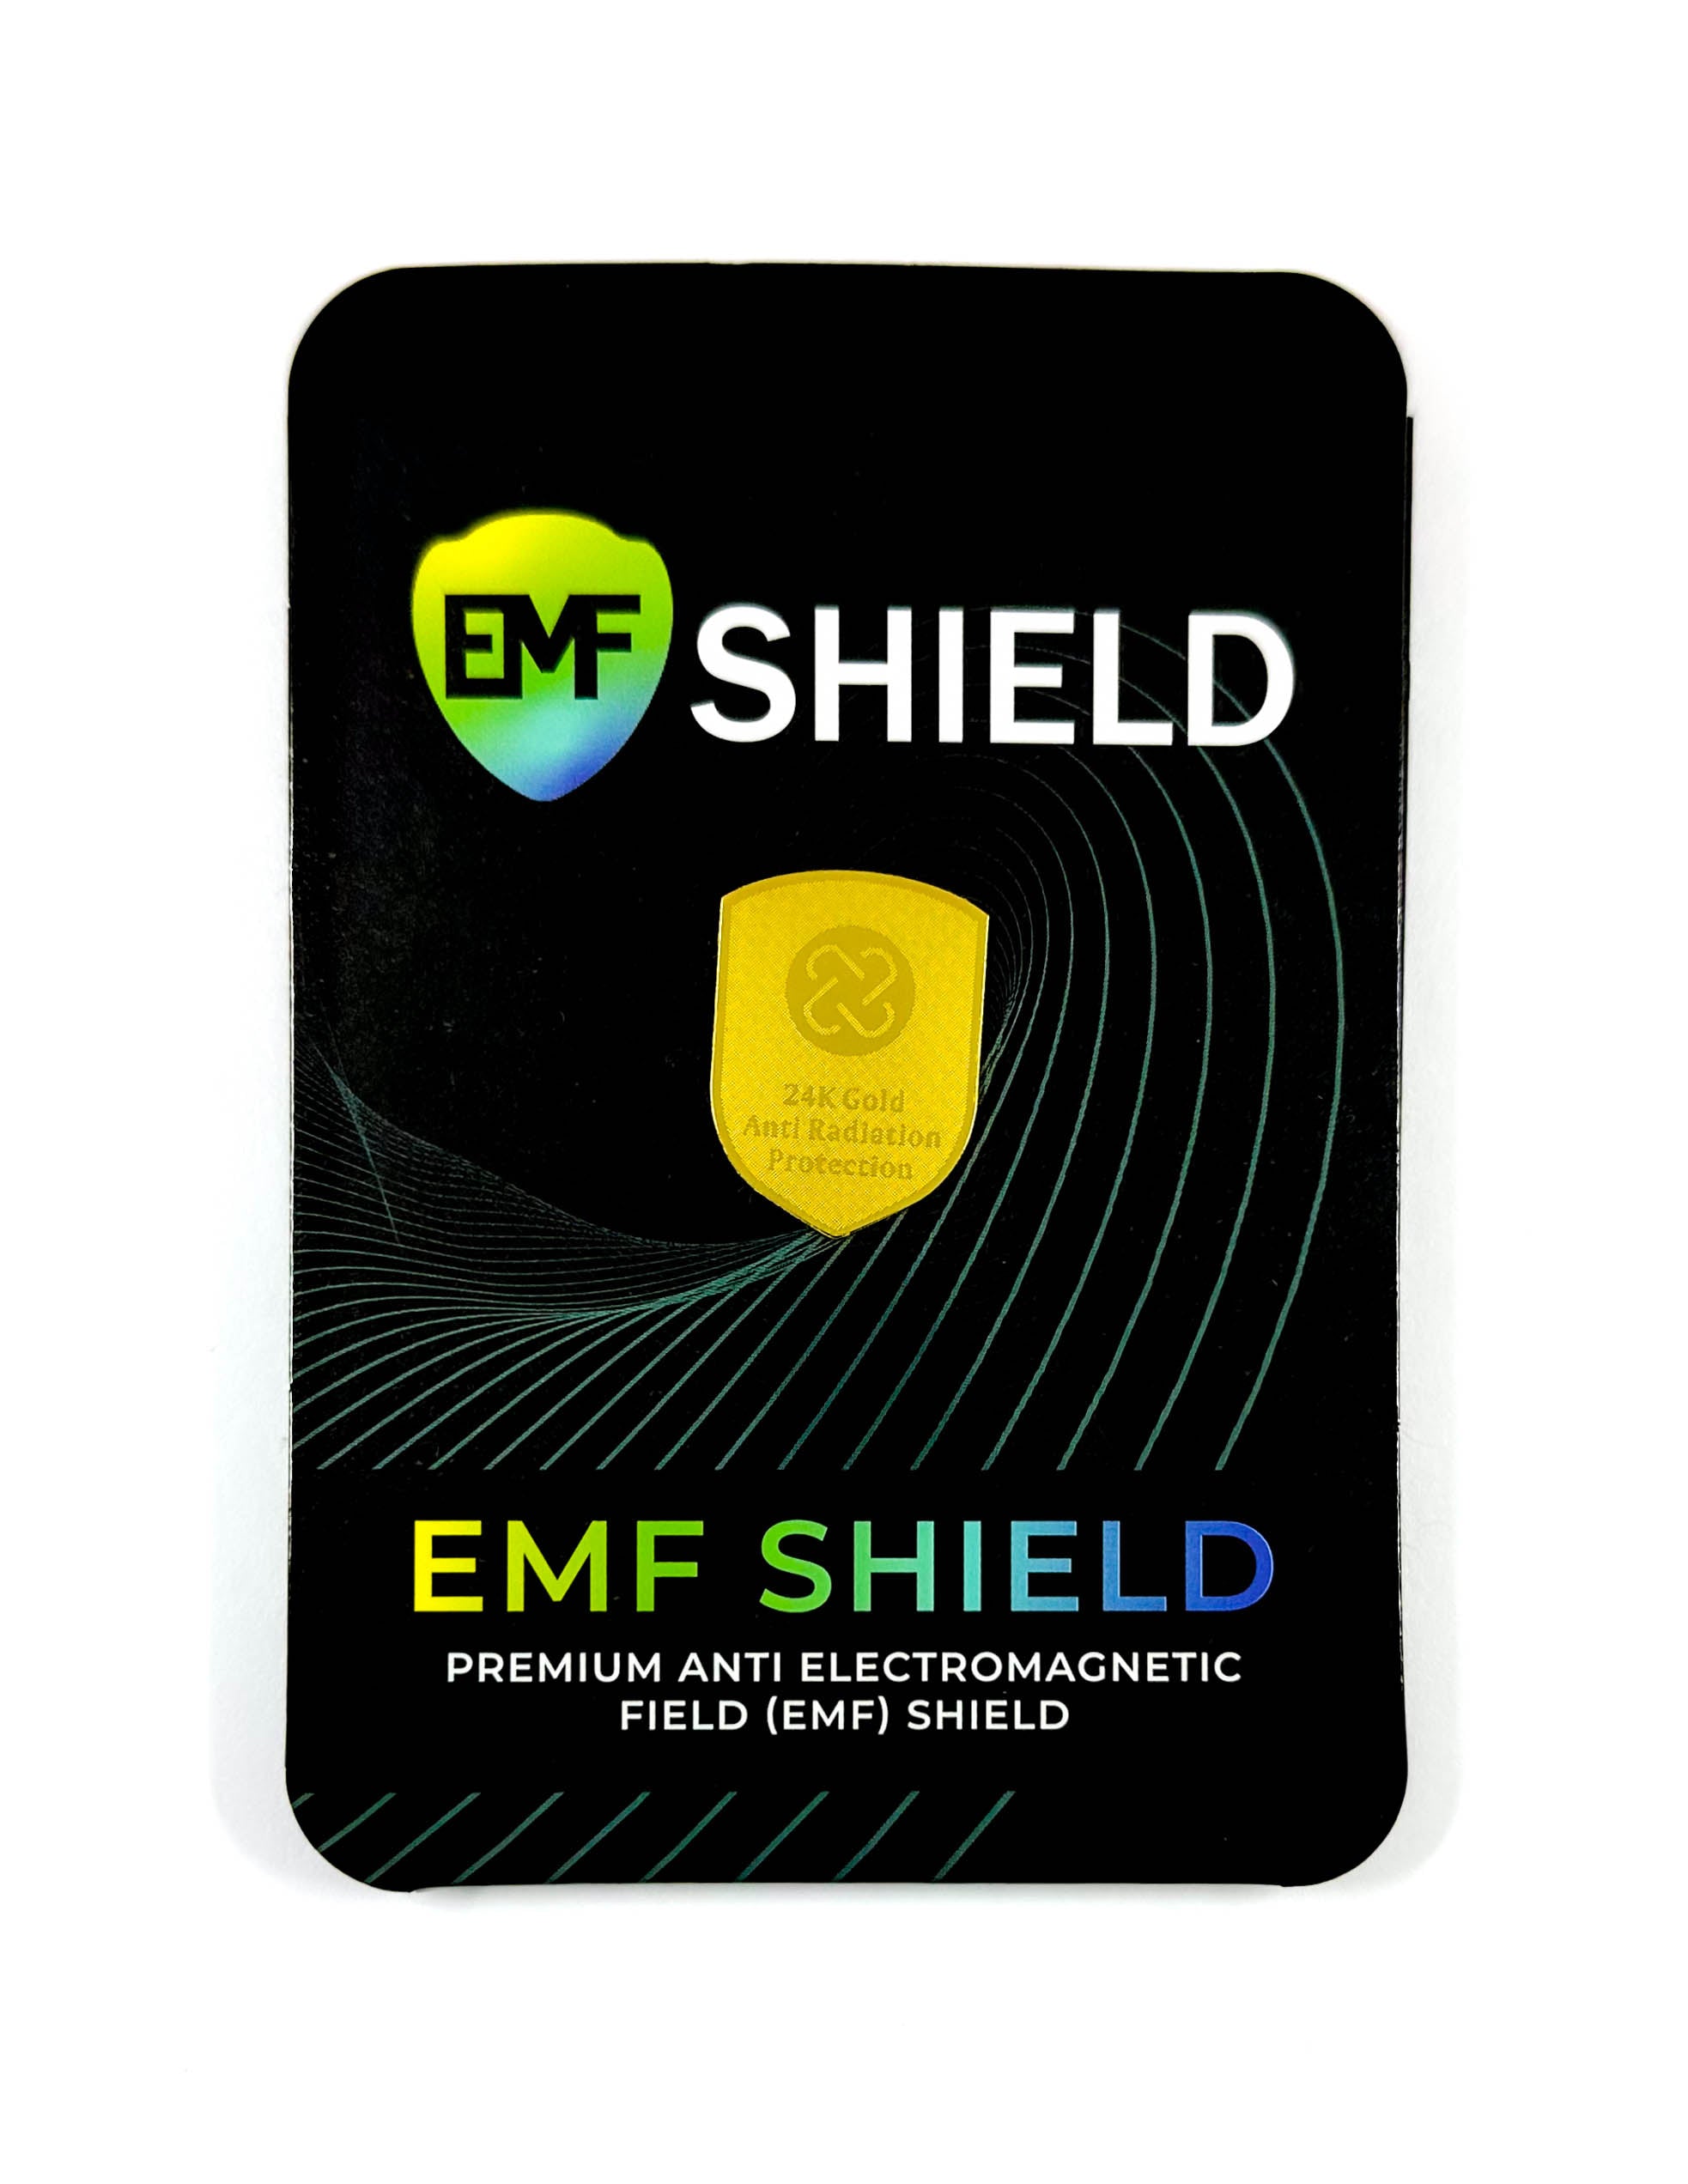 FREE EMF Defense Shield for Phone and Electronics ($20 Value)